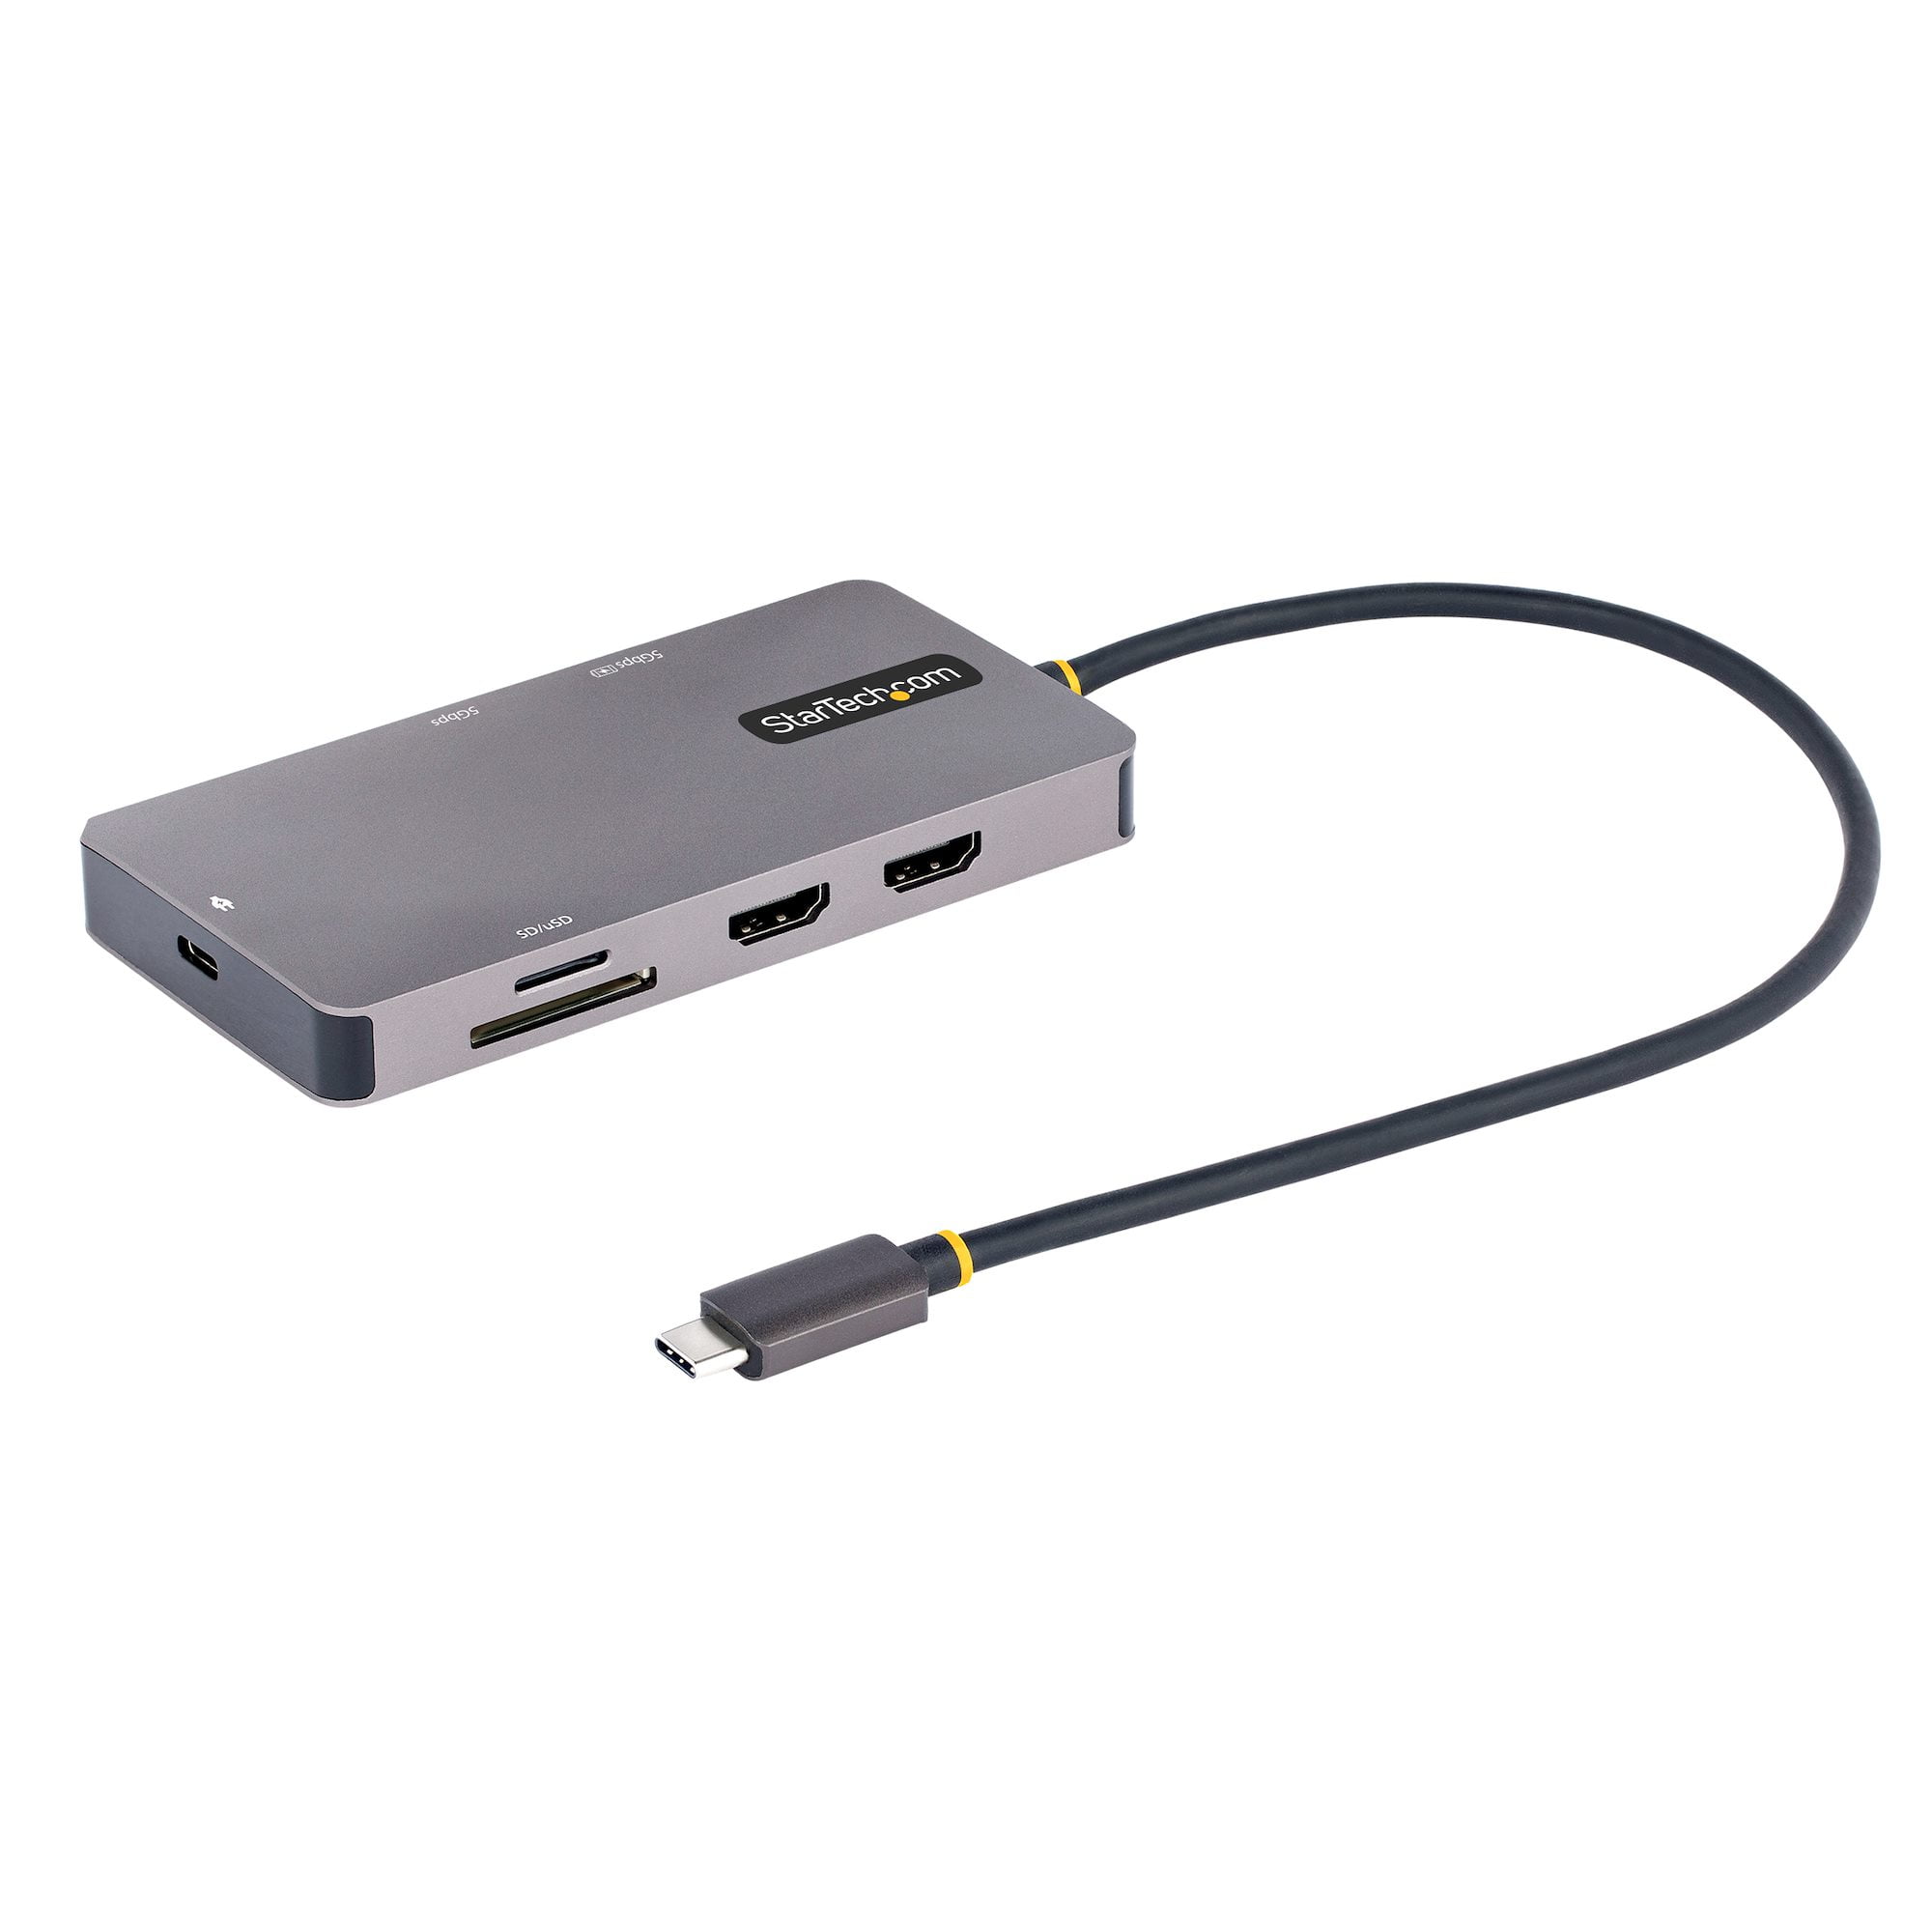 Picture of Startech 120BUSBCMLTIPRT USB C 2 HDMI Multiport Adapter